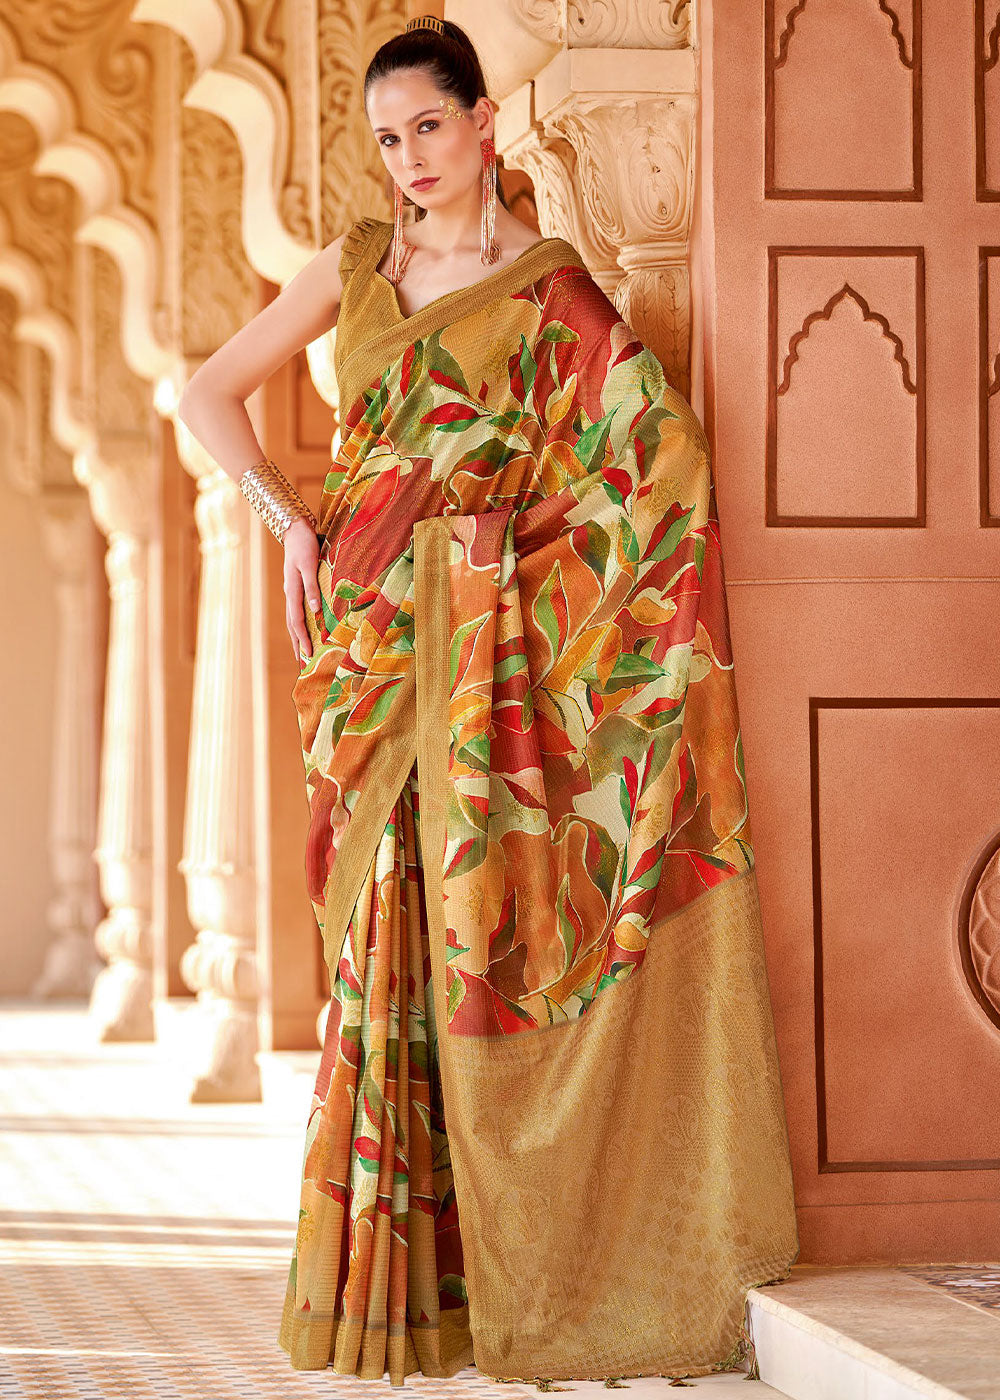 Buy MySilkLove Copper Canyon Brown Floral Printed Cotton Silk Saree Online